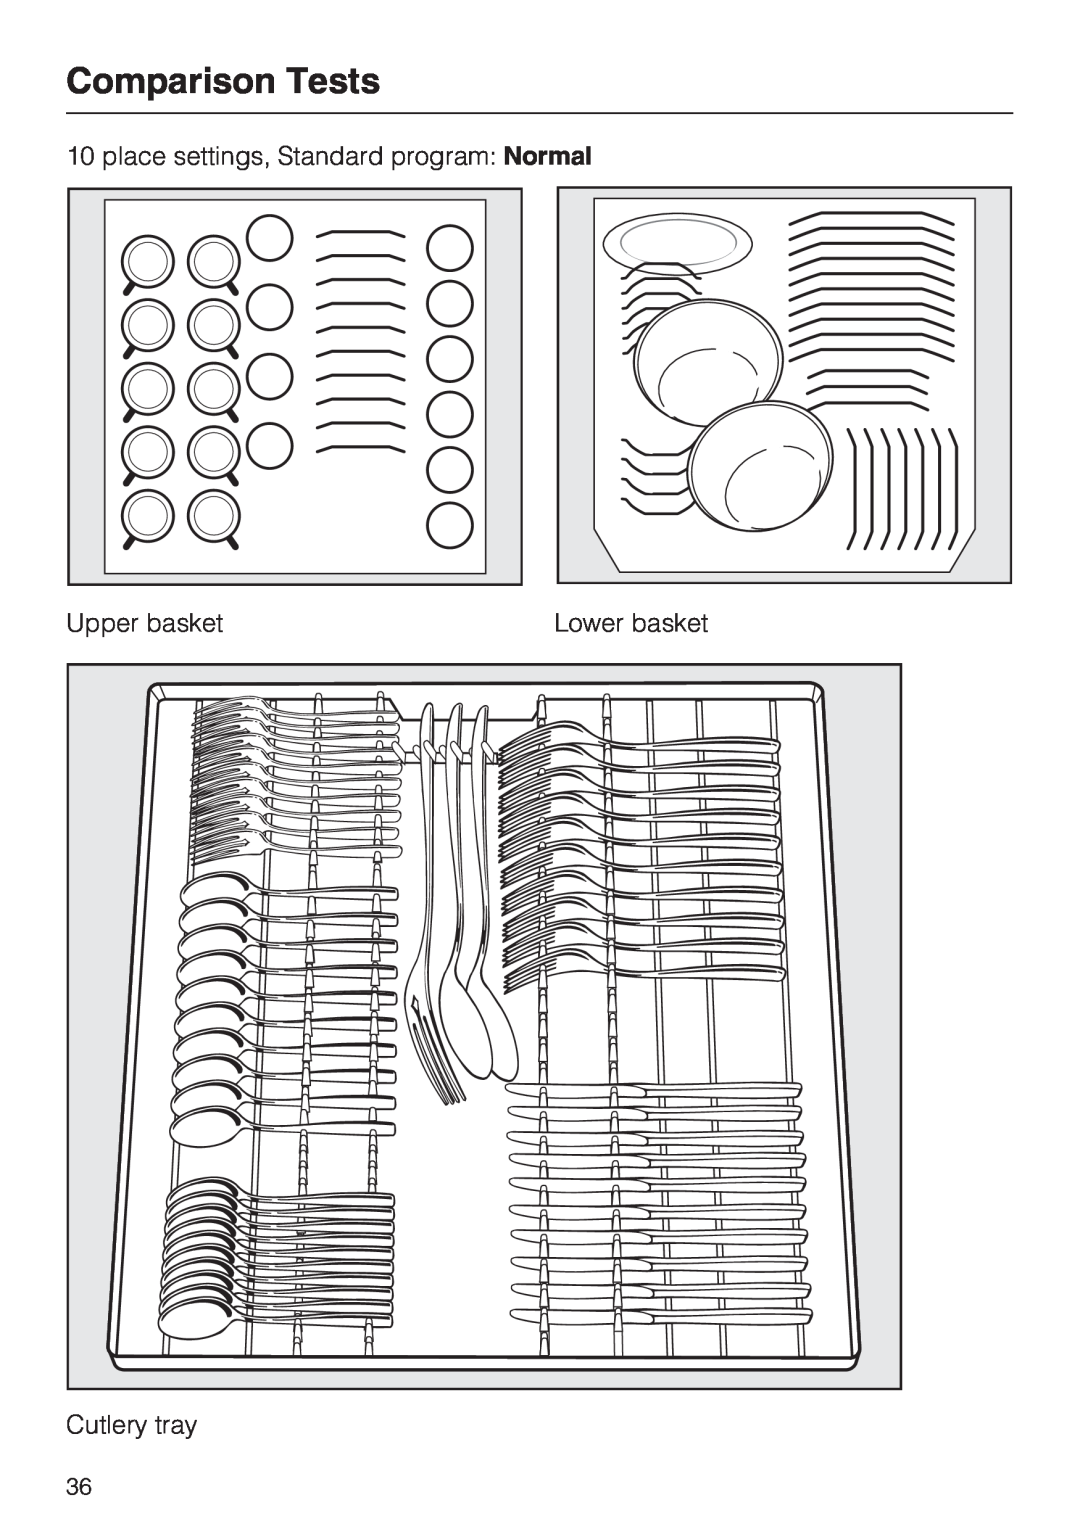 Miele G 2181, G 1181 Comparison Tests, place settings, Standard program Normal, Upper basket, Lower basket, Cutlery tray 